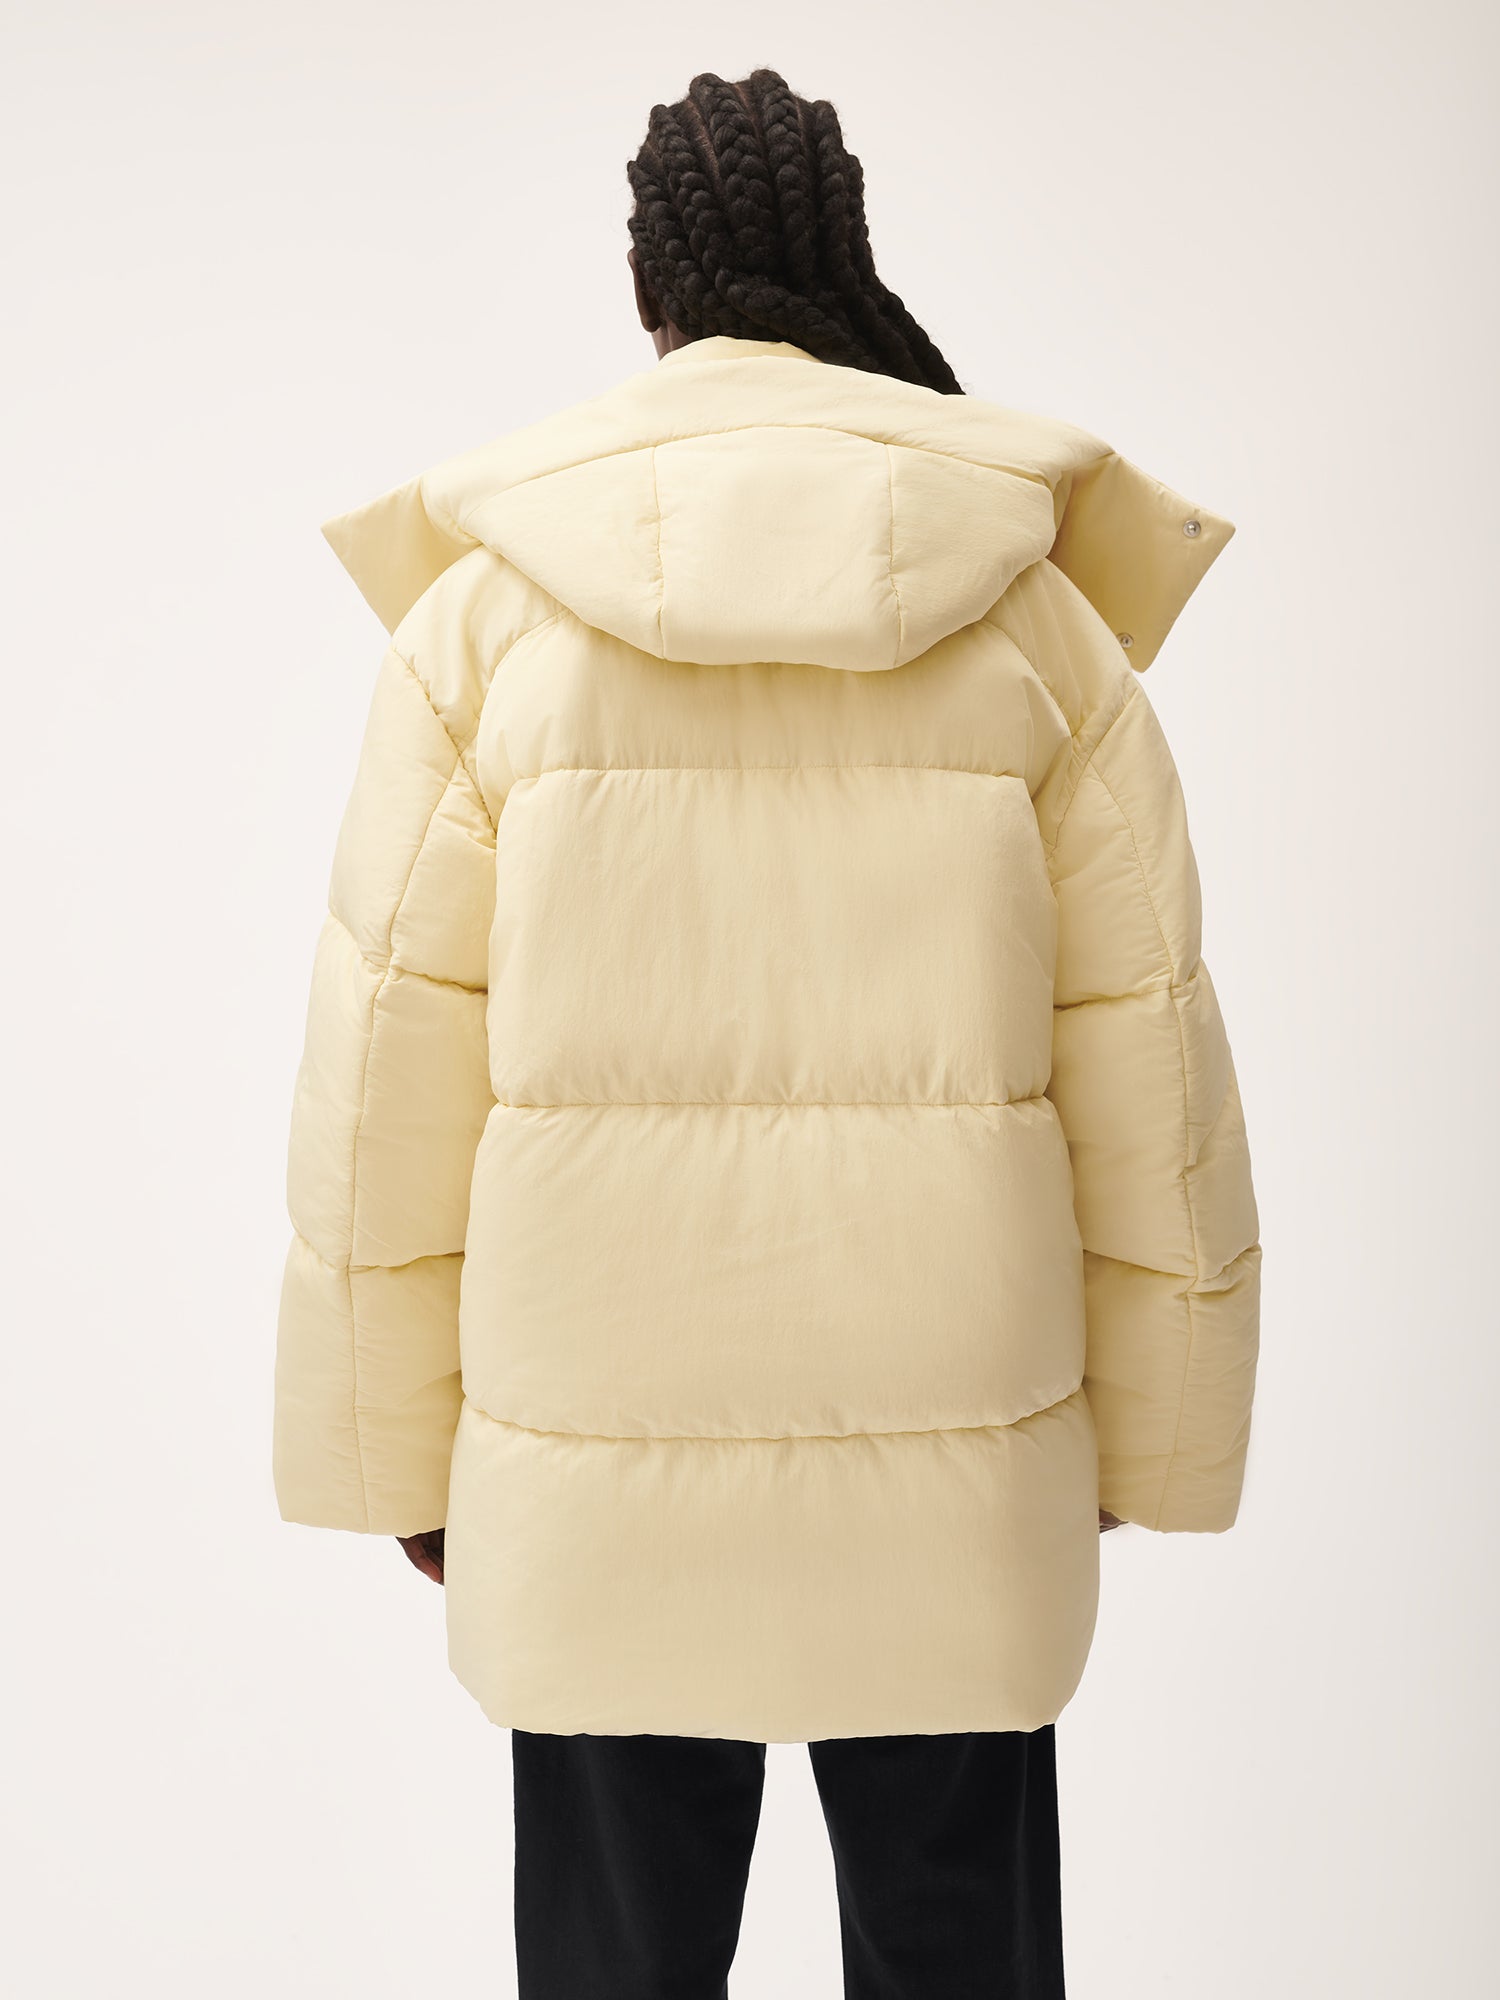 FLWRDWN_Recycle_Nylon_Exaggerated_Long_Puffer_Rind_Yellow_Womens-2FLWRDWN_Recycle_Nylon_Exaggerated_Long_Puffer_Rind_Yellow_female-2